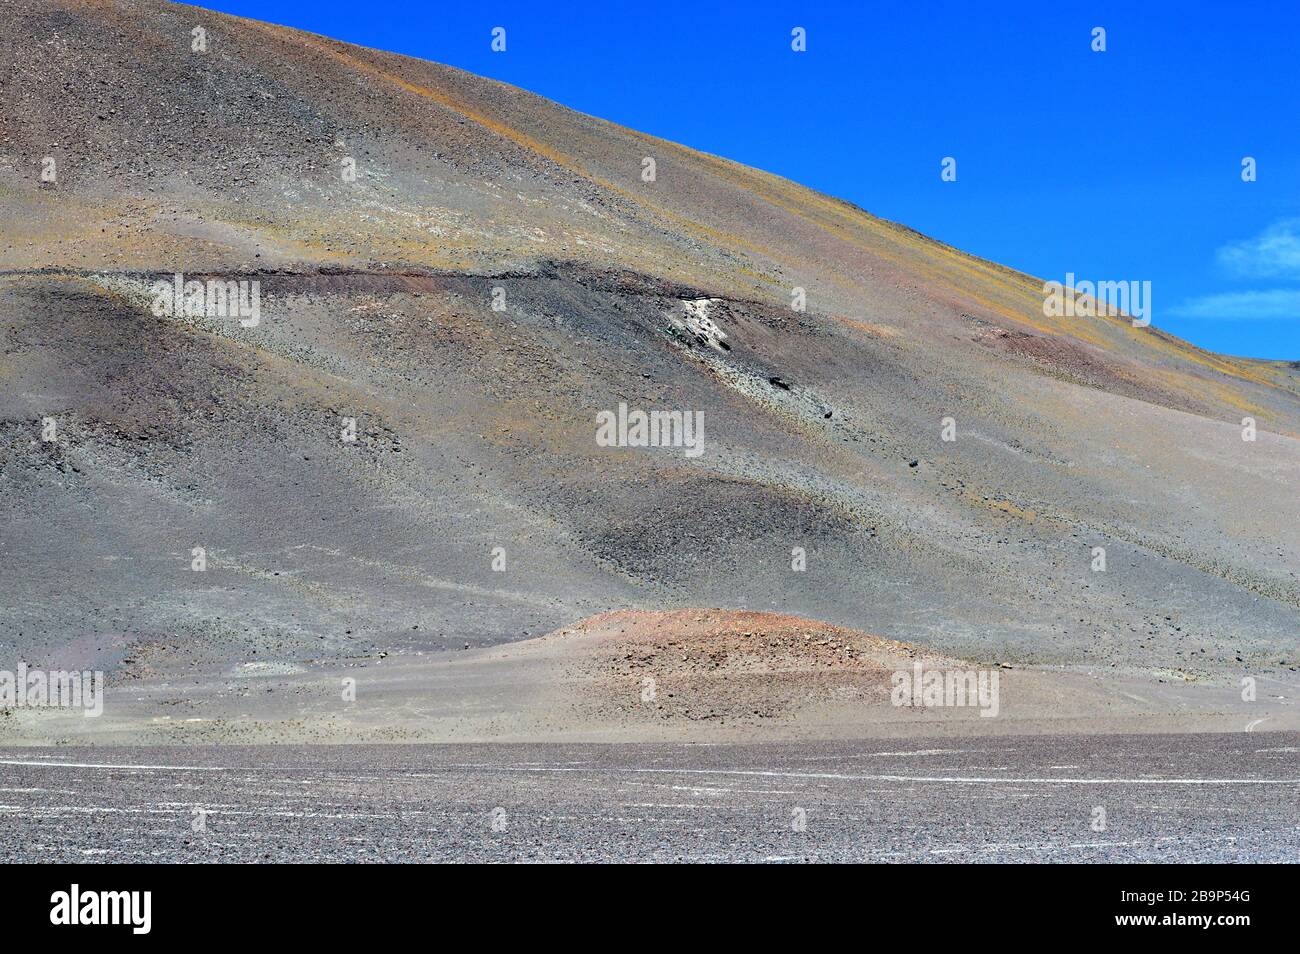 Remains of the railway accident in the 'train to the clouds' in 1996 front of the Socompa lagoon. Salta province, Argentina. Stock Photo